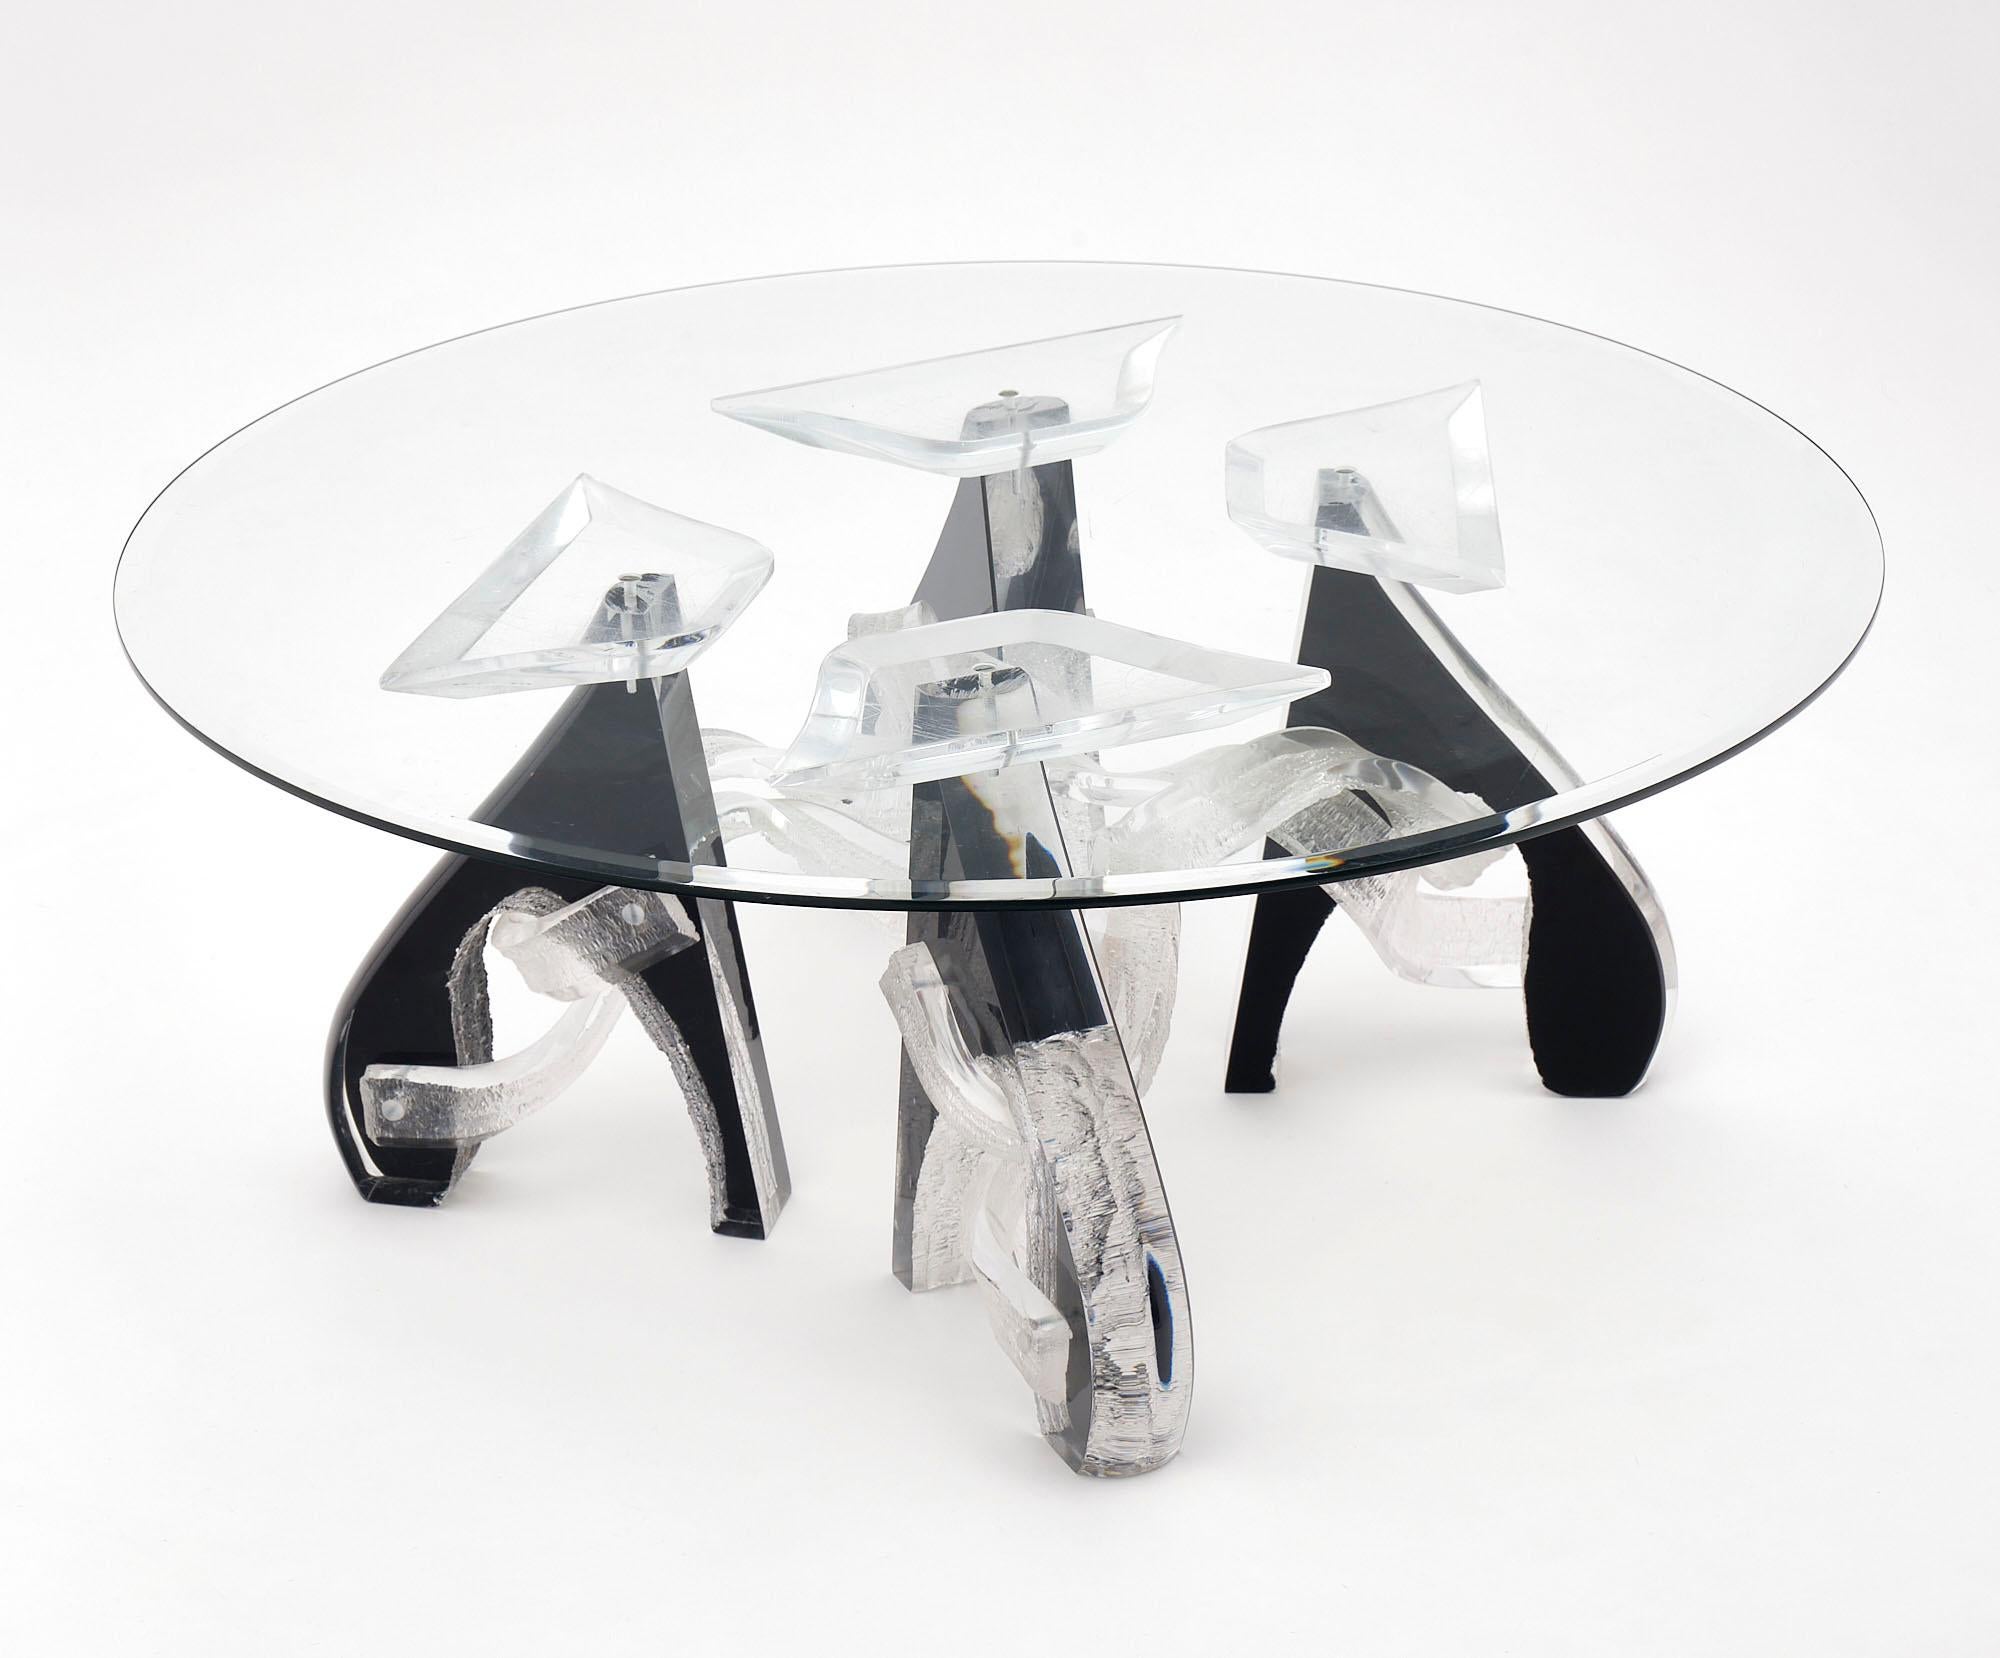 Coffee table made of clear and black Lucite with a glass top. This piece is in the style of artist Shlomi Haziza.